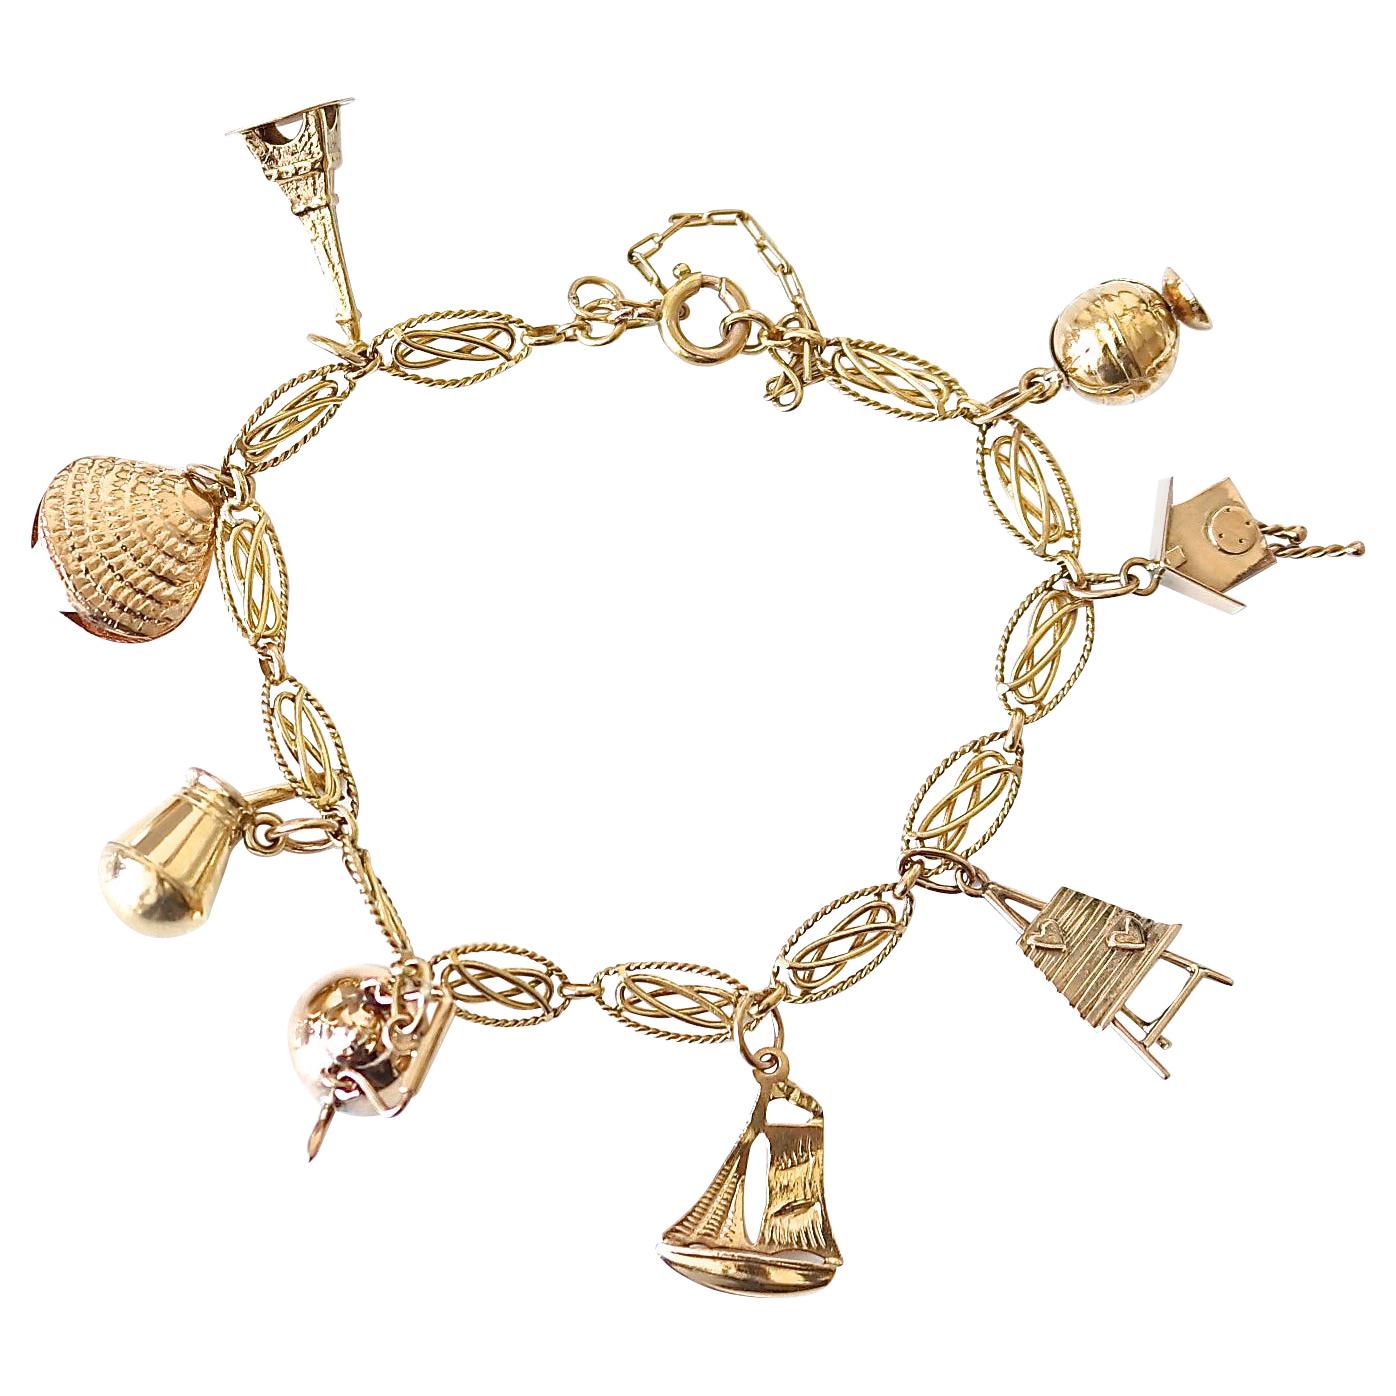 Traditional 1950s and 1960s Gold Charm Bracelet with Enamel and Mechanical  Charms